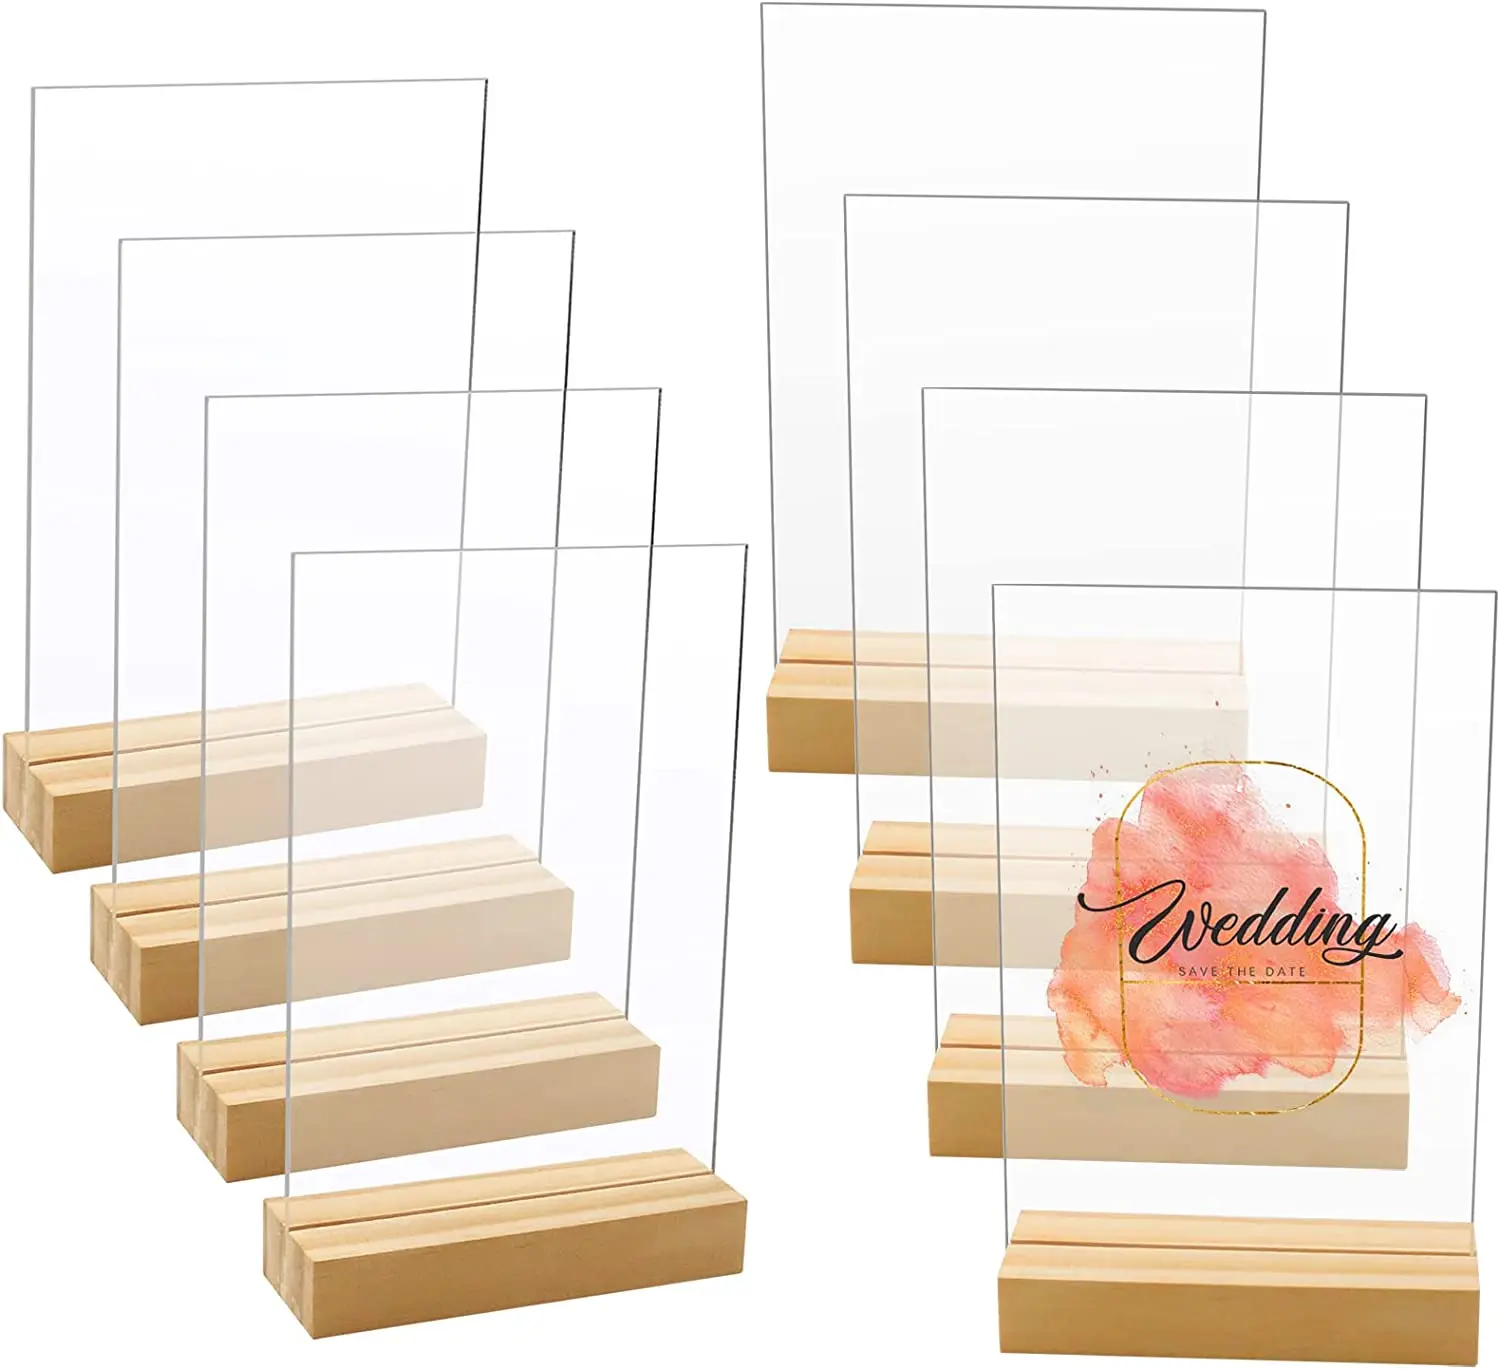 4X6 Inch Blank Acrylic Signs with Wooden Base Clear Acrylic Sheet Holder -  China Acrylic Sheet Holder and Display Stand price